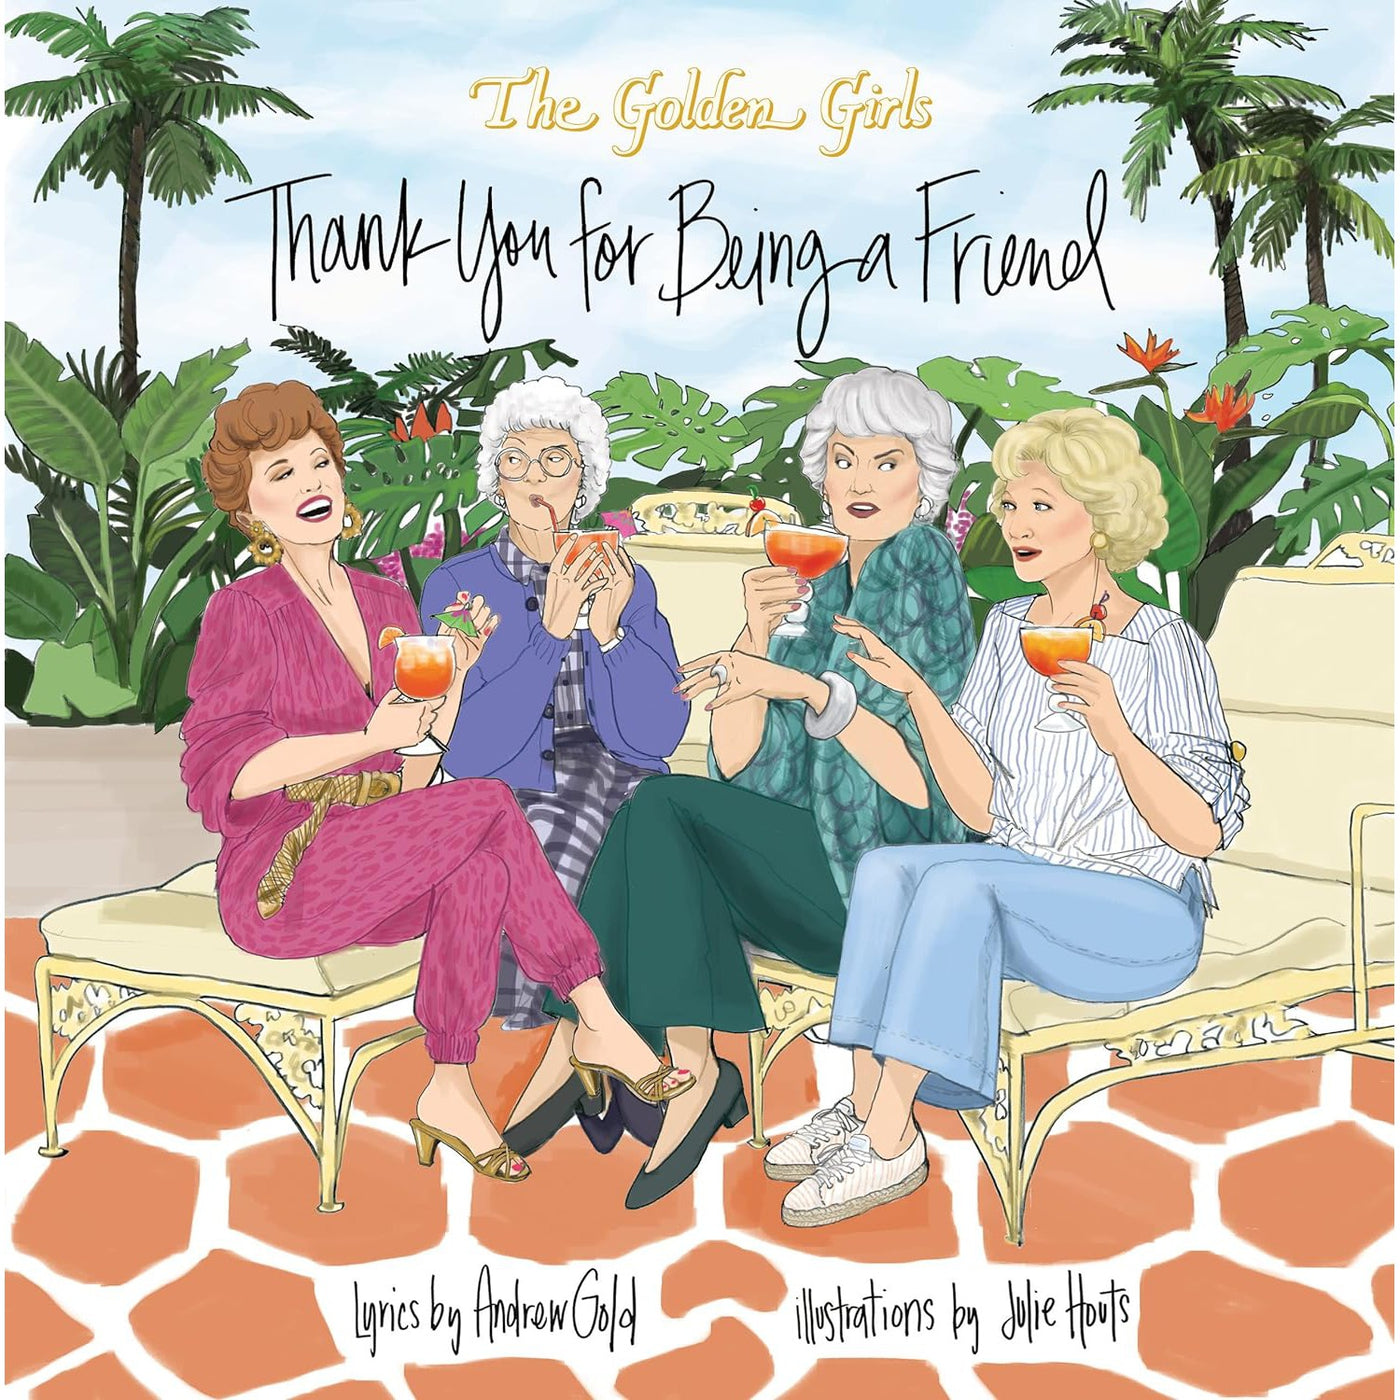 The Golden Girls: Thank You For Being a Friend